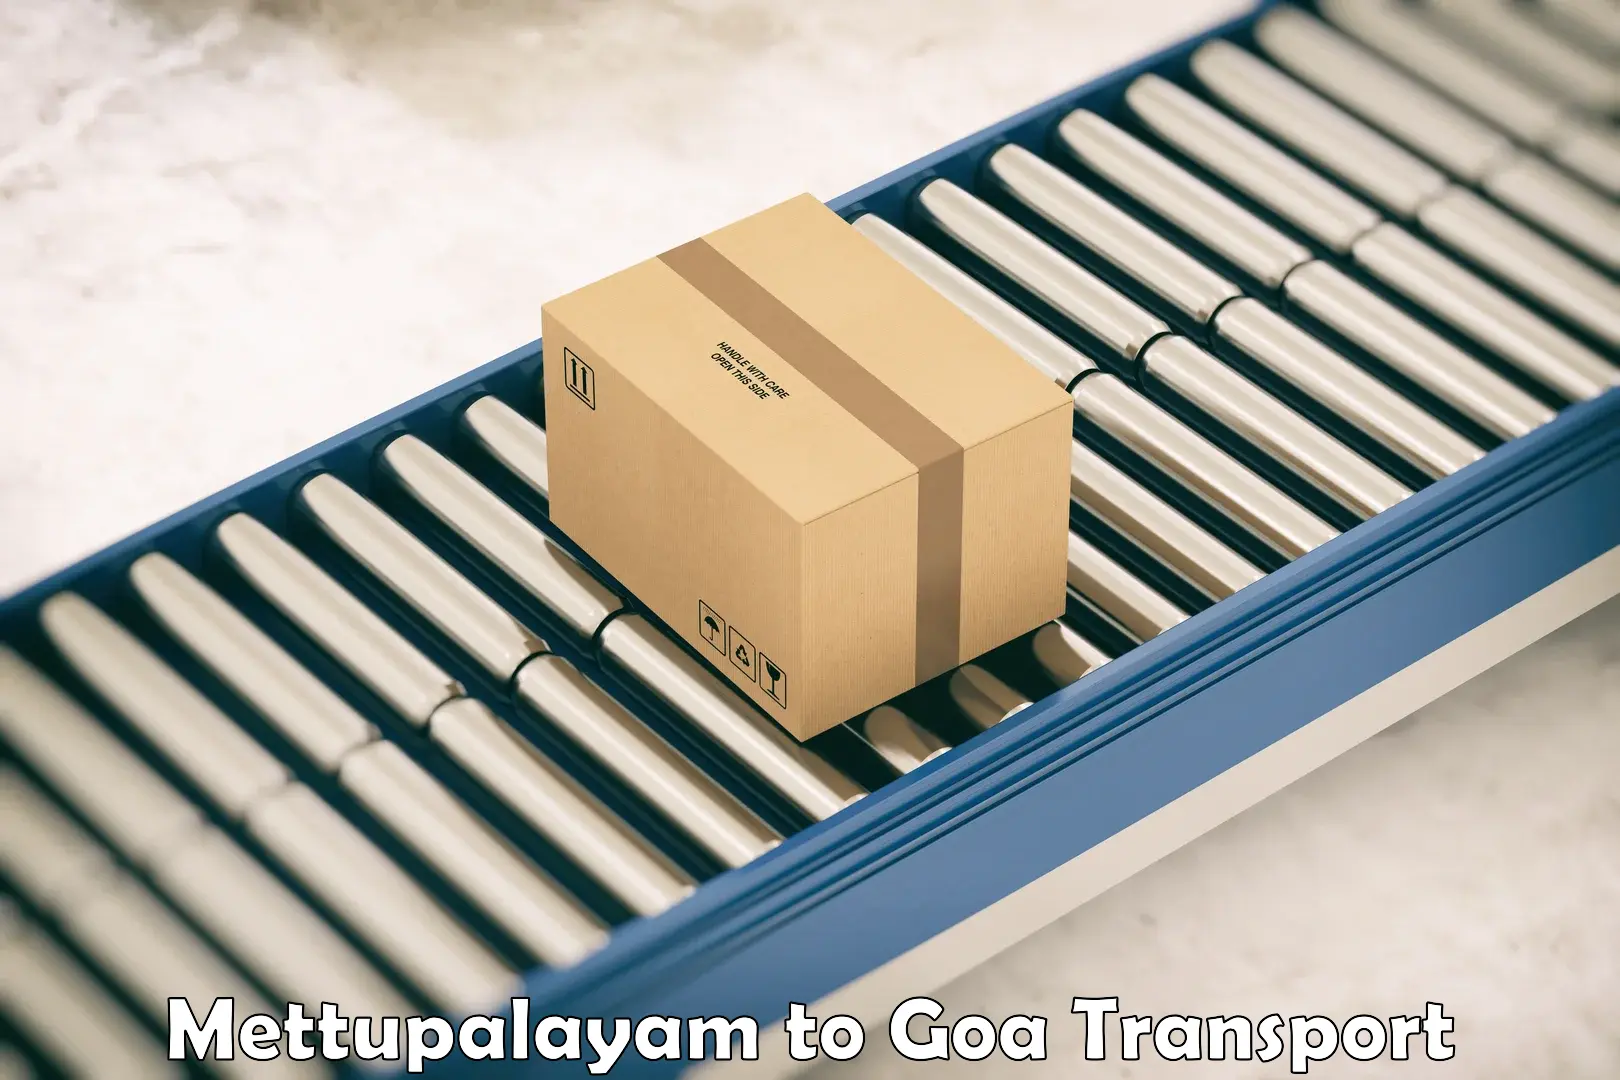 Goods delivery service Mettupalayam to Panjim